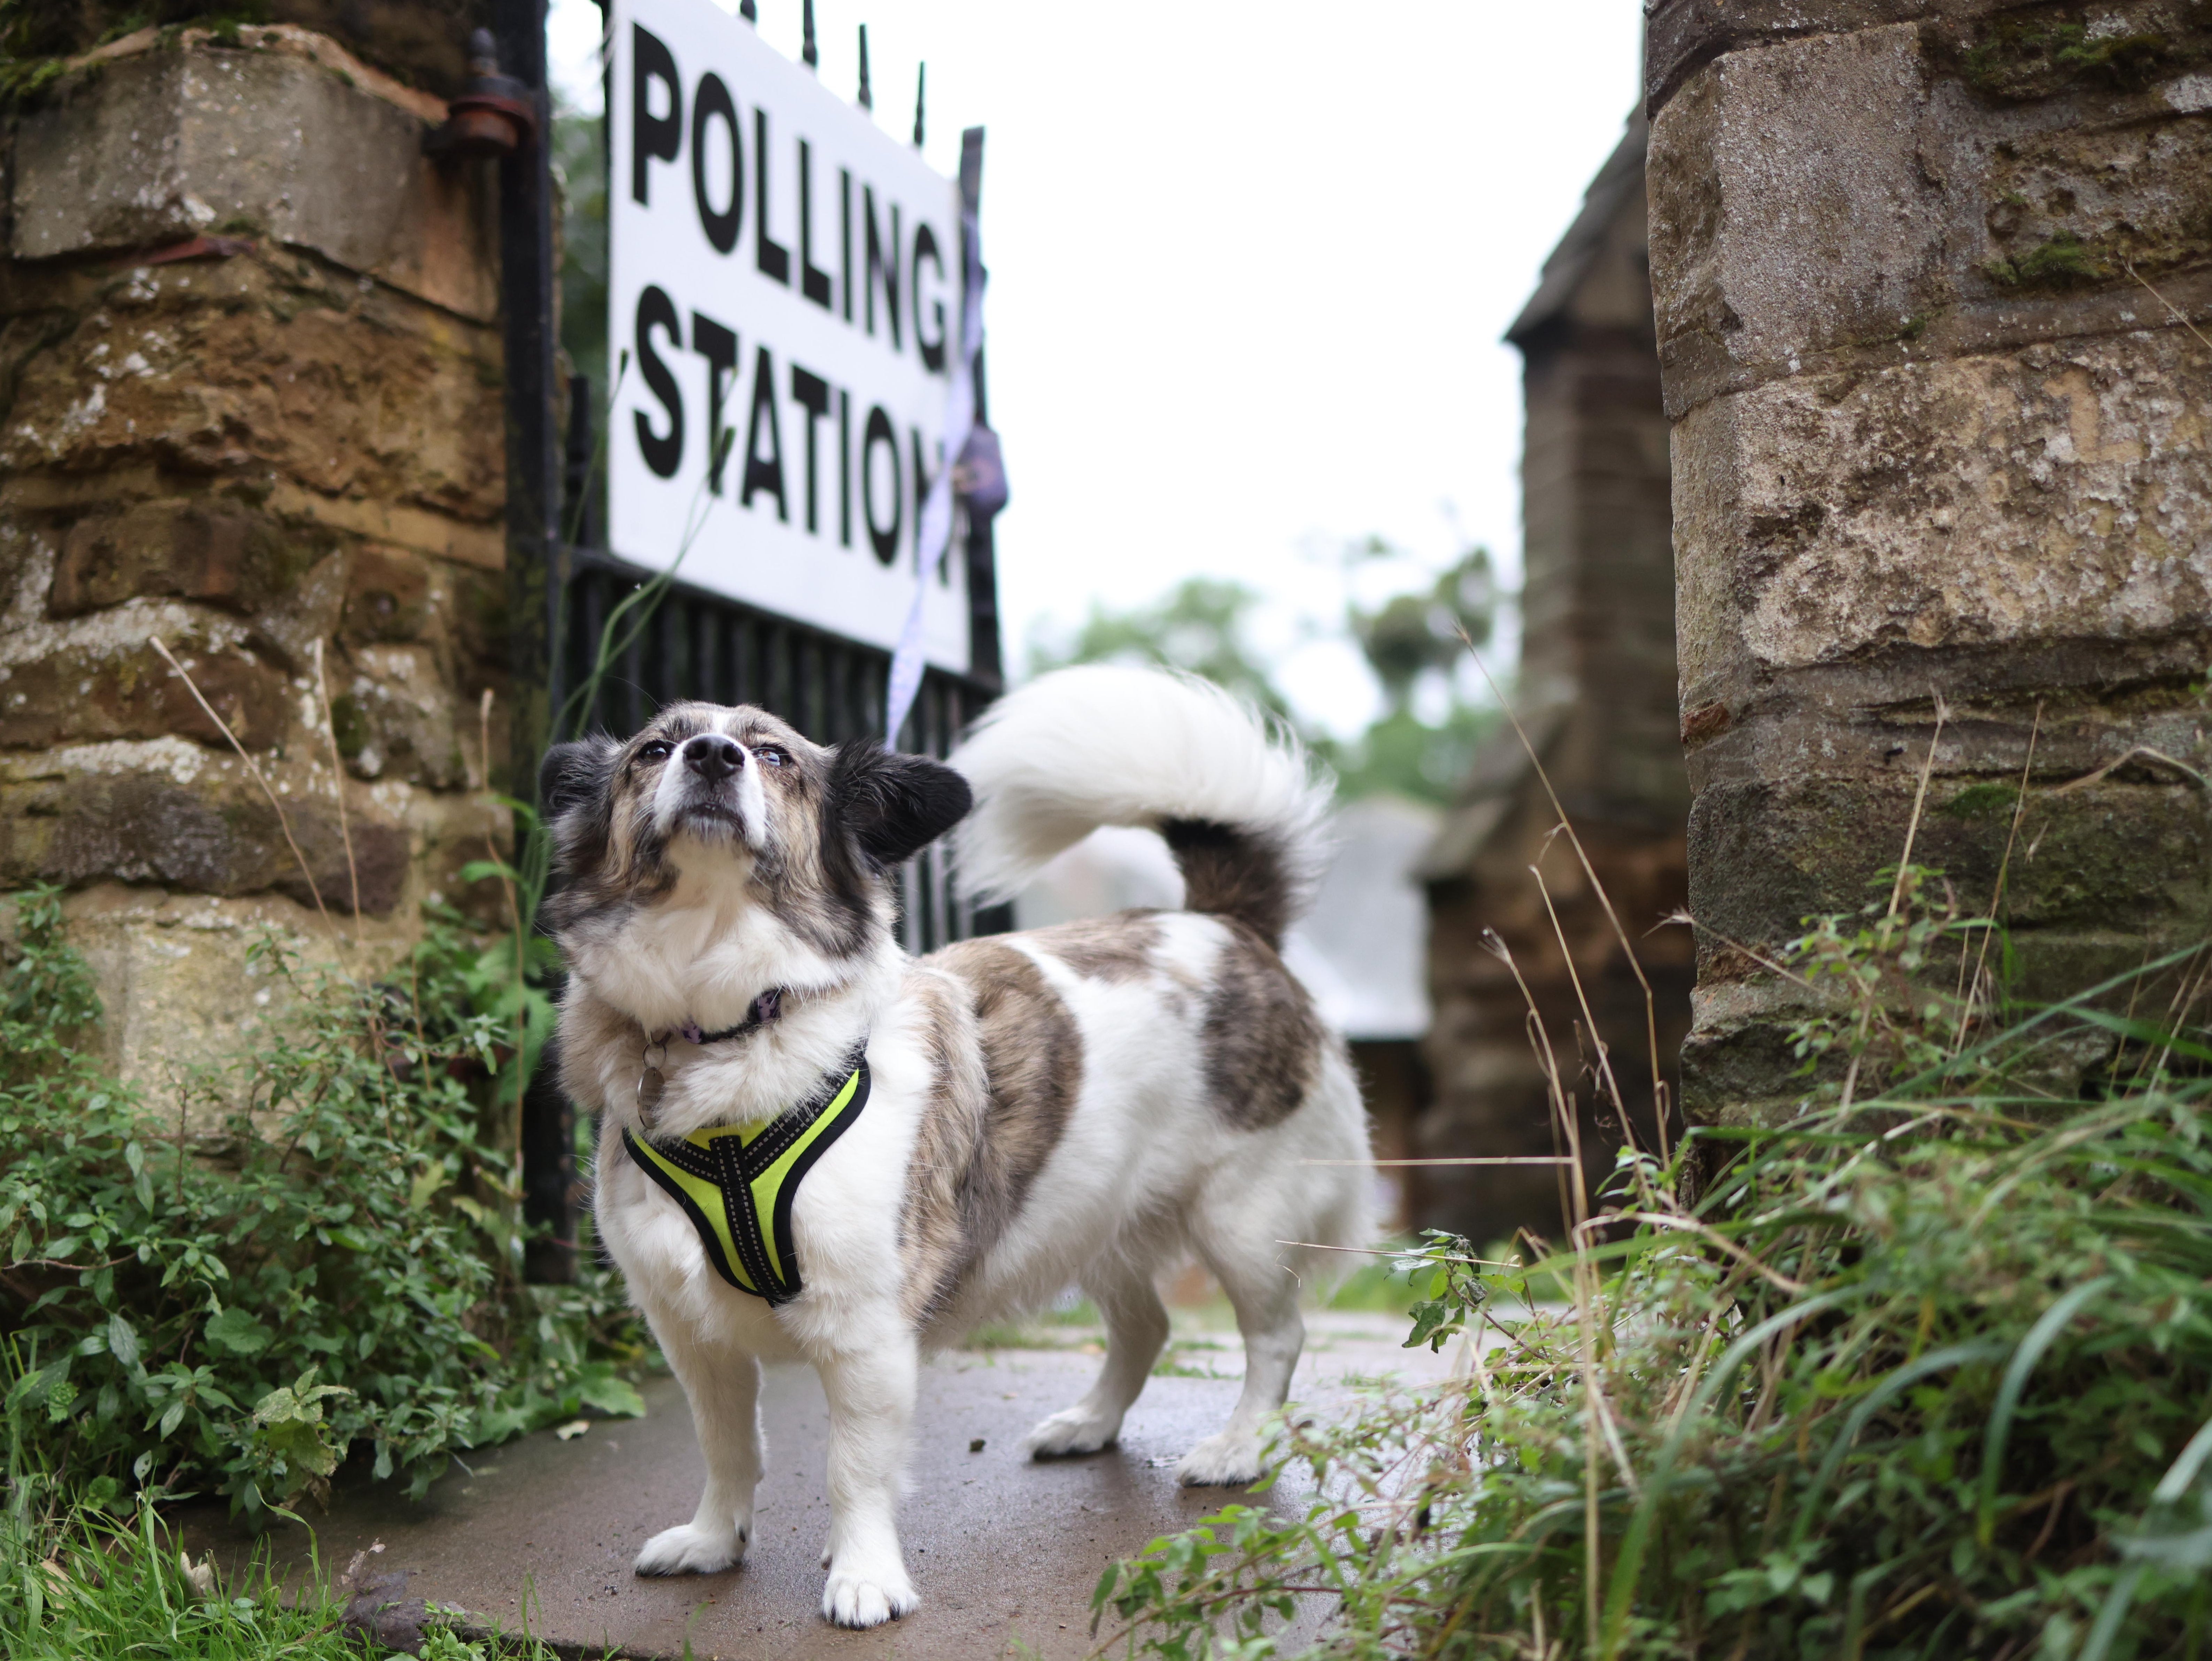 When there is a picture of a polling station, a dog is never far away